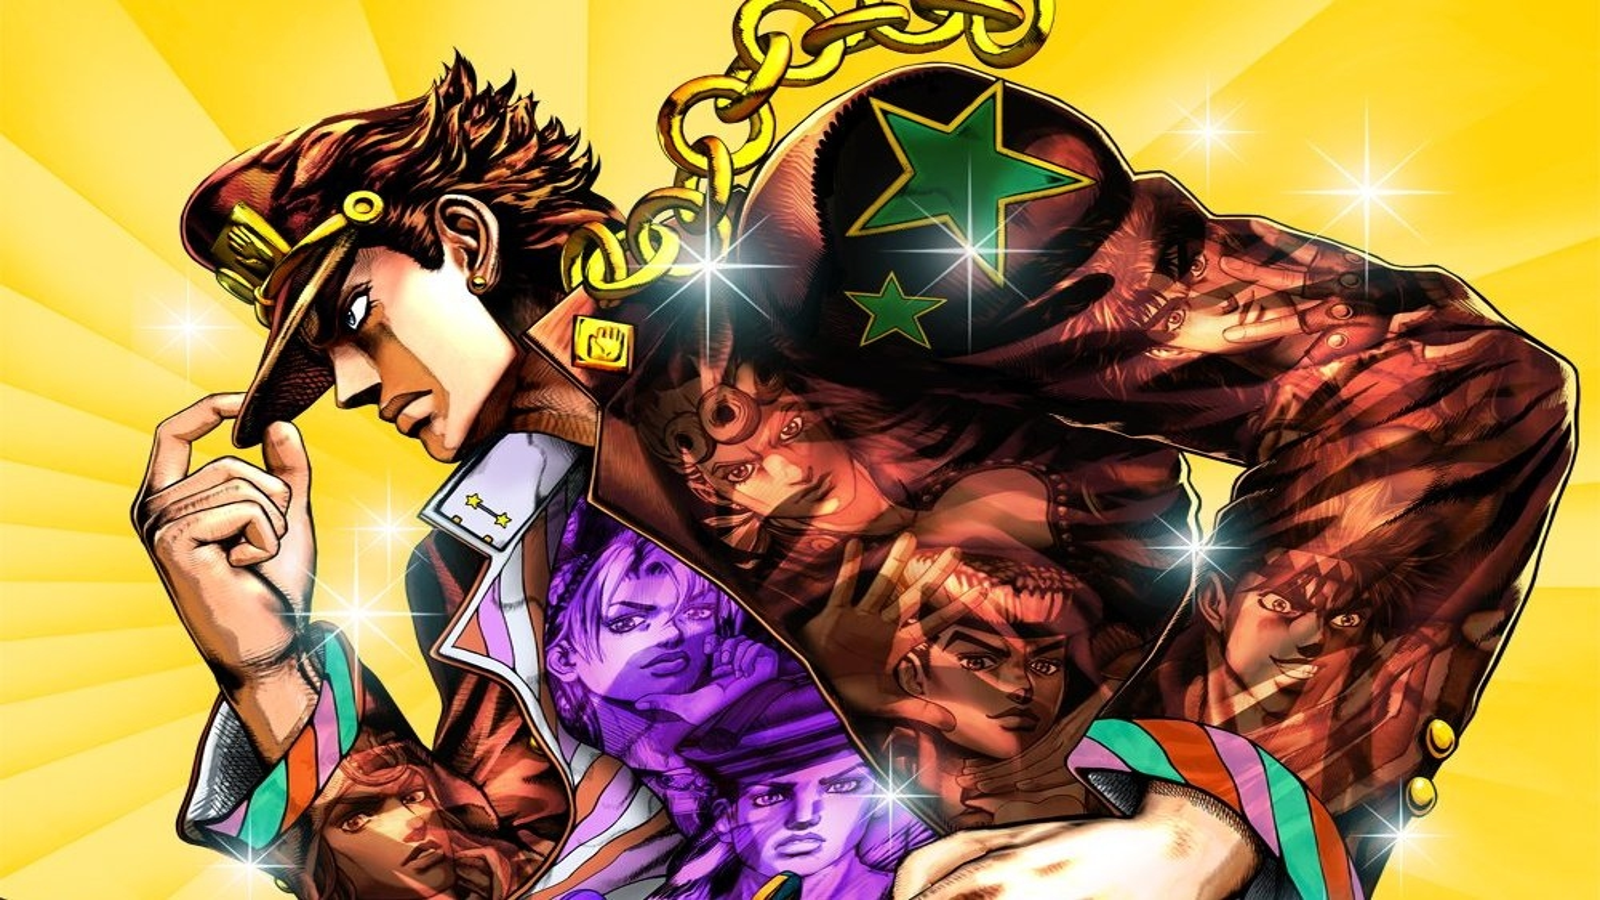 All Character Victory Poses-JoJo's Bizarre Adventure All Star